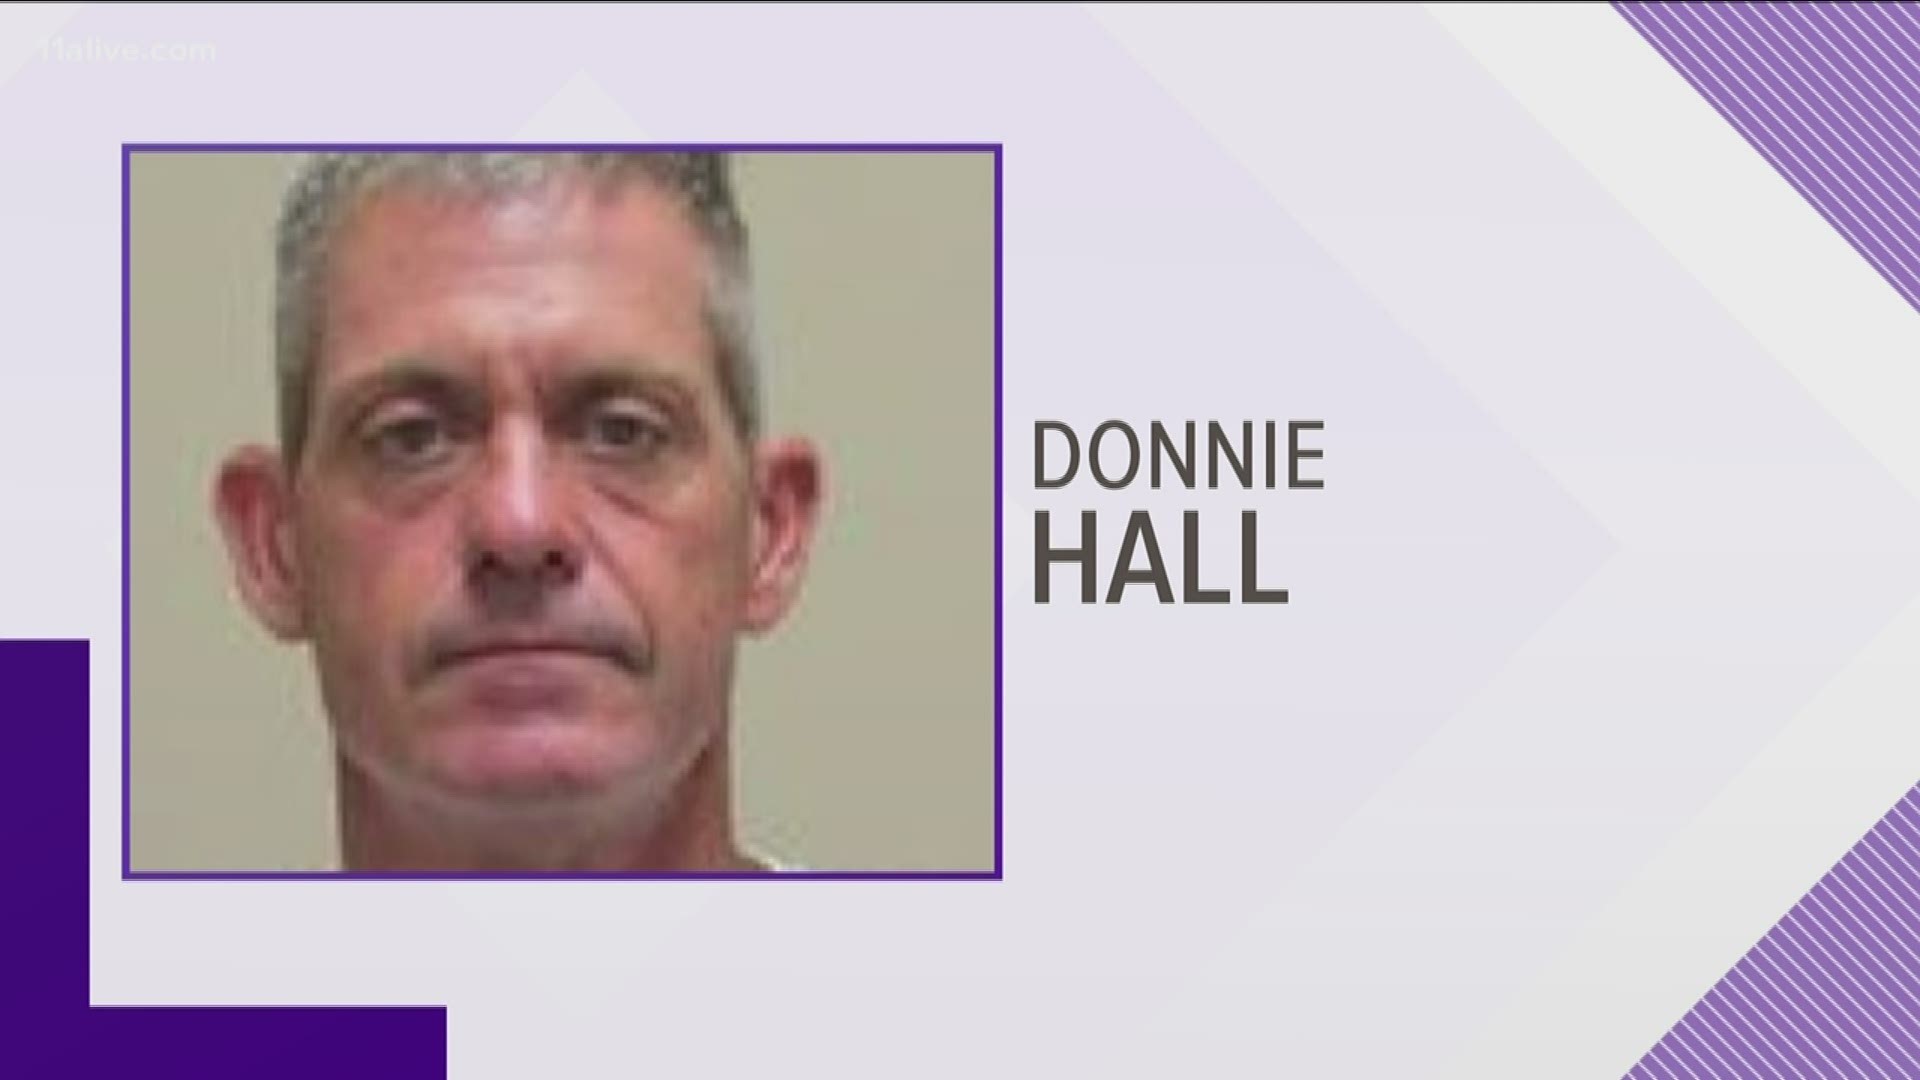 Have you seen this man? Police are looking for Donnie Hall.